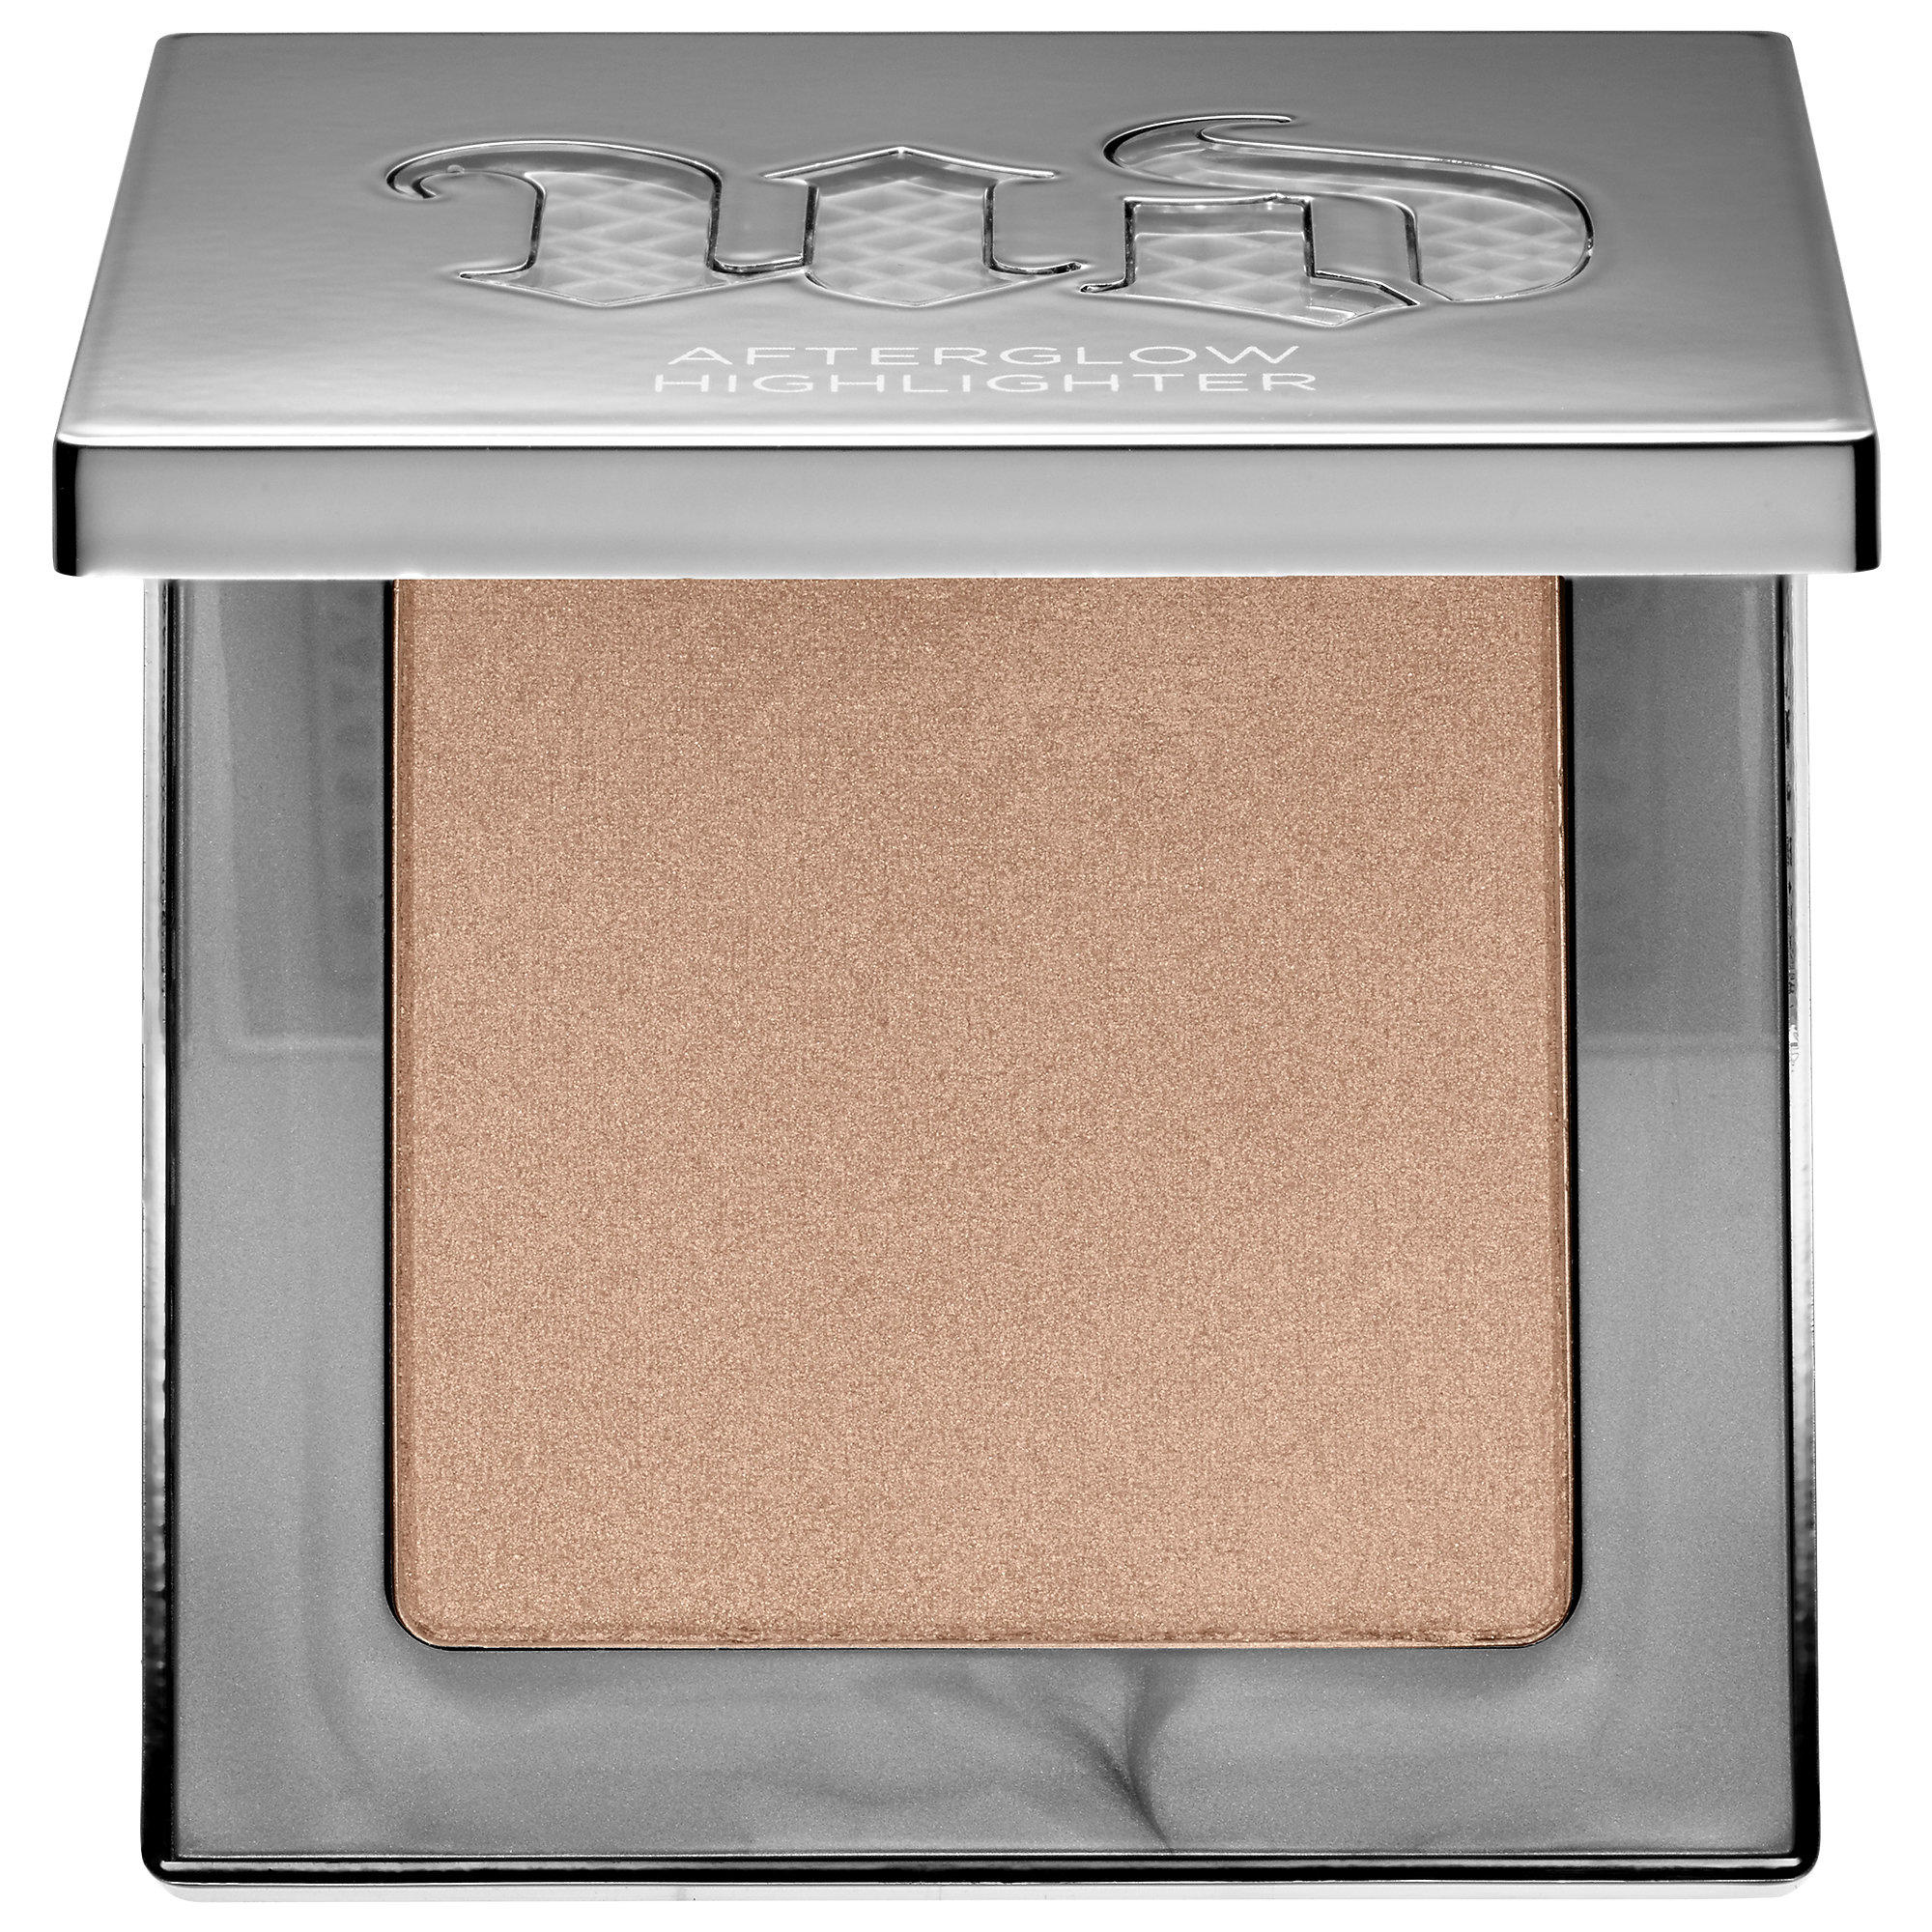 Urban Decay Afterglow 8-Hour Powder Highlighter Sin